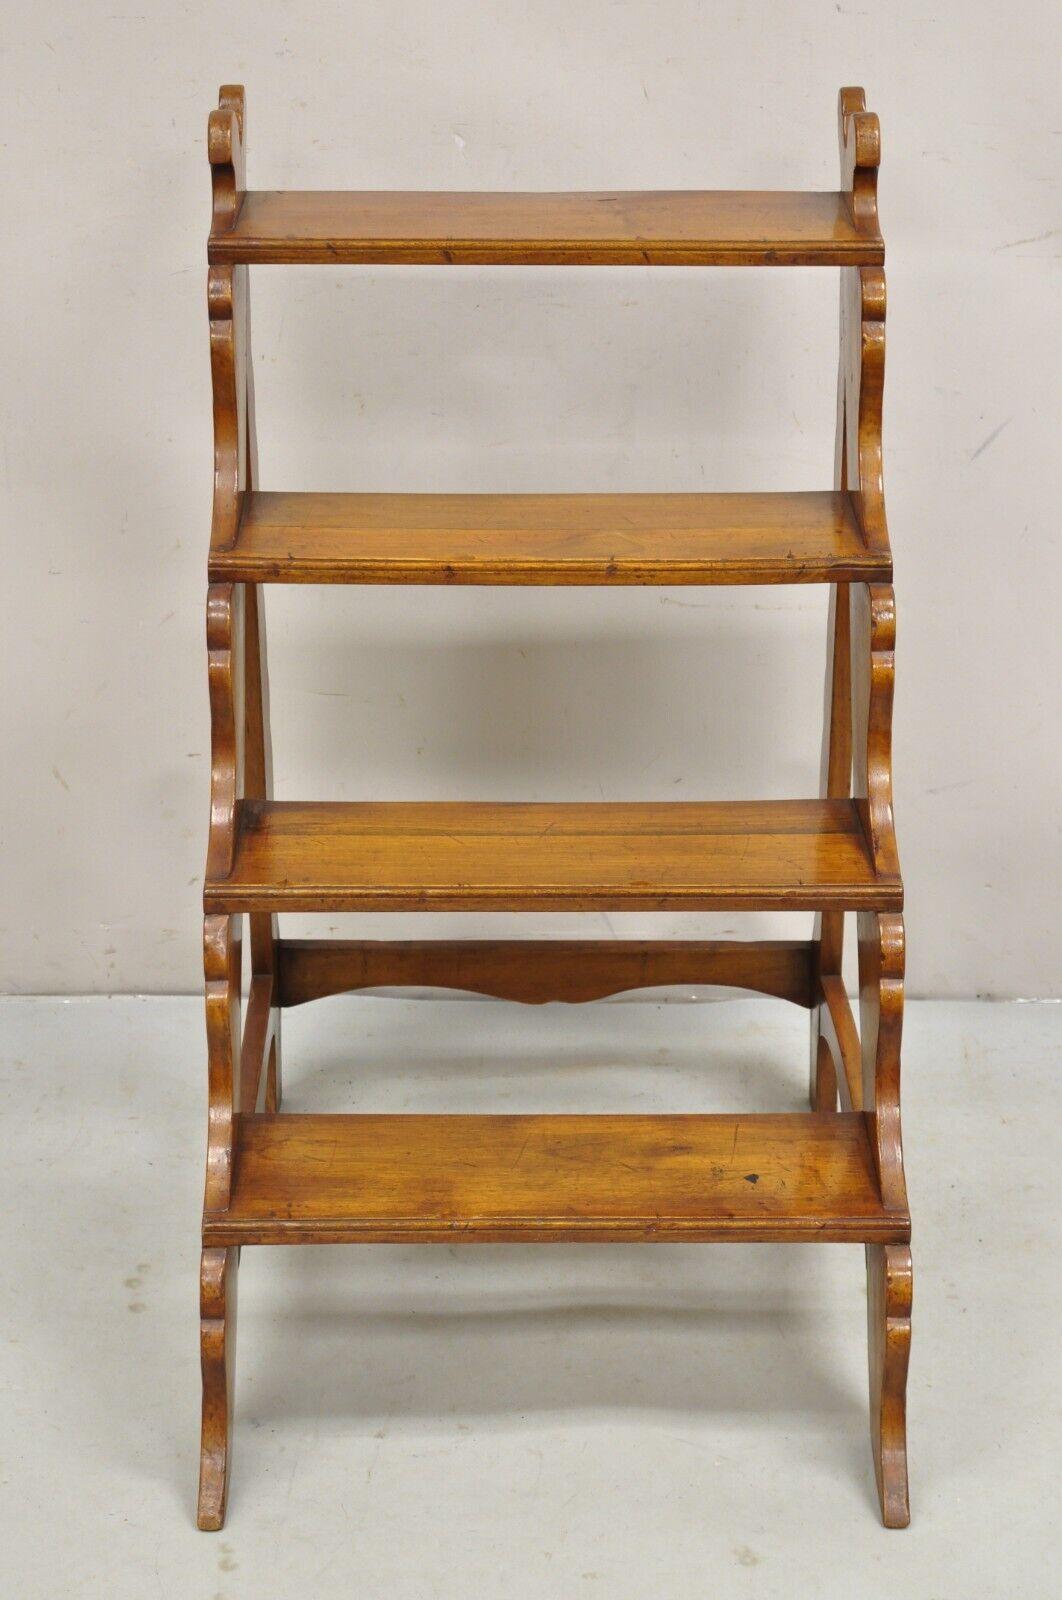 Vintage Italian Provincial Style Carved Olivewood Library Step Ladder Side Table. Item features solid wood construction, distressed/antiqued finish, nicely carved details, stamped 